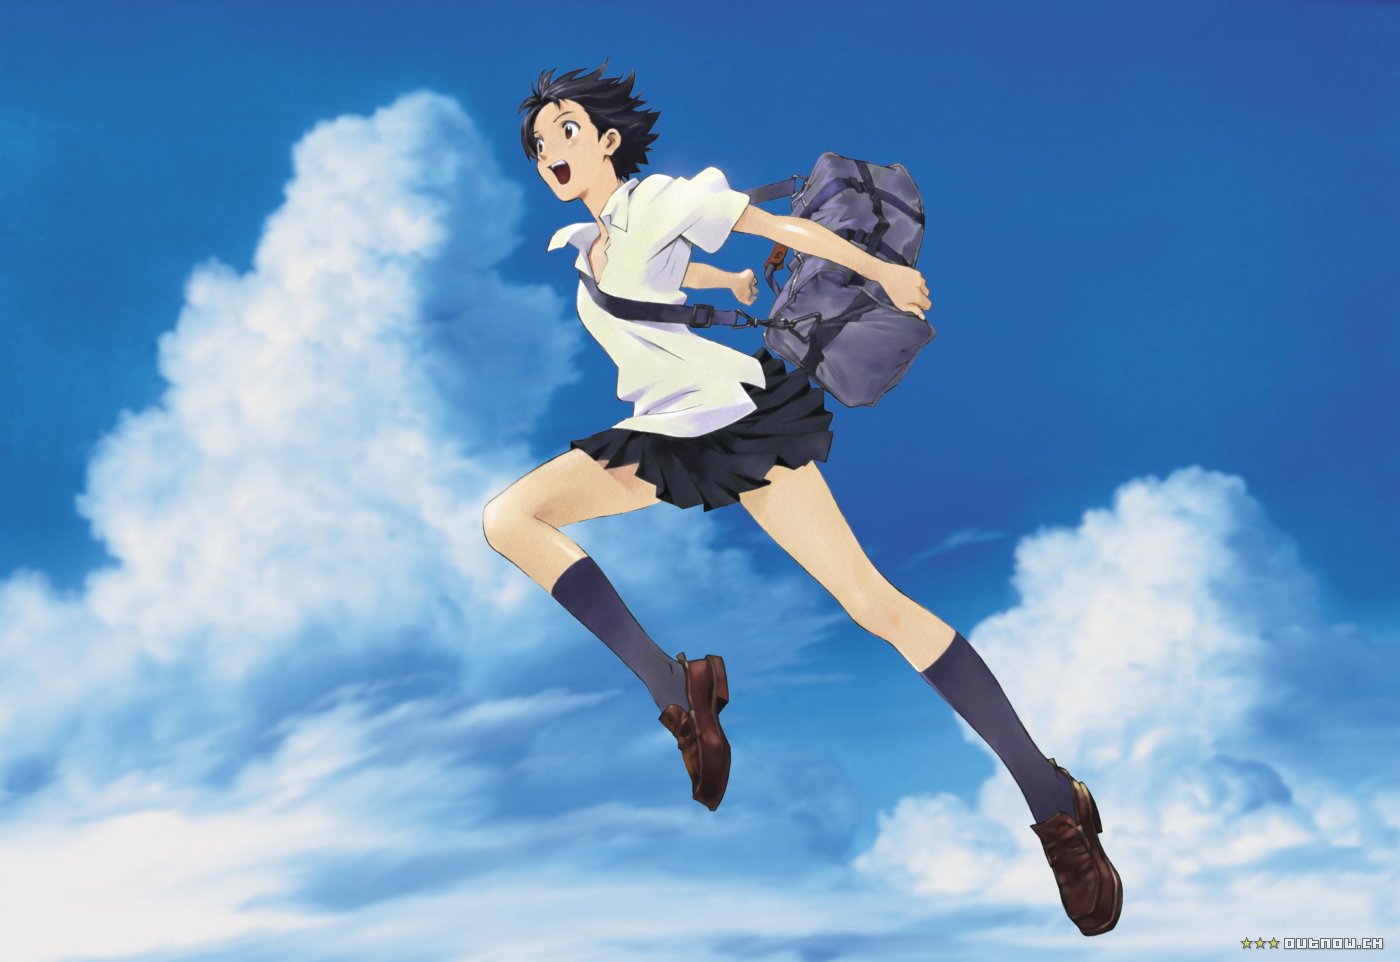 The Girl Who Leapt Through Time Pics, Anime Collection